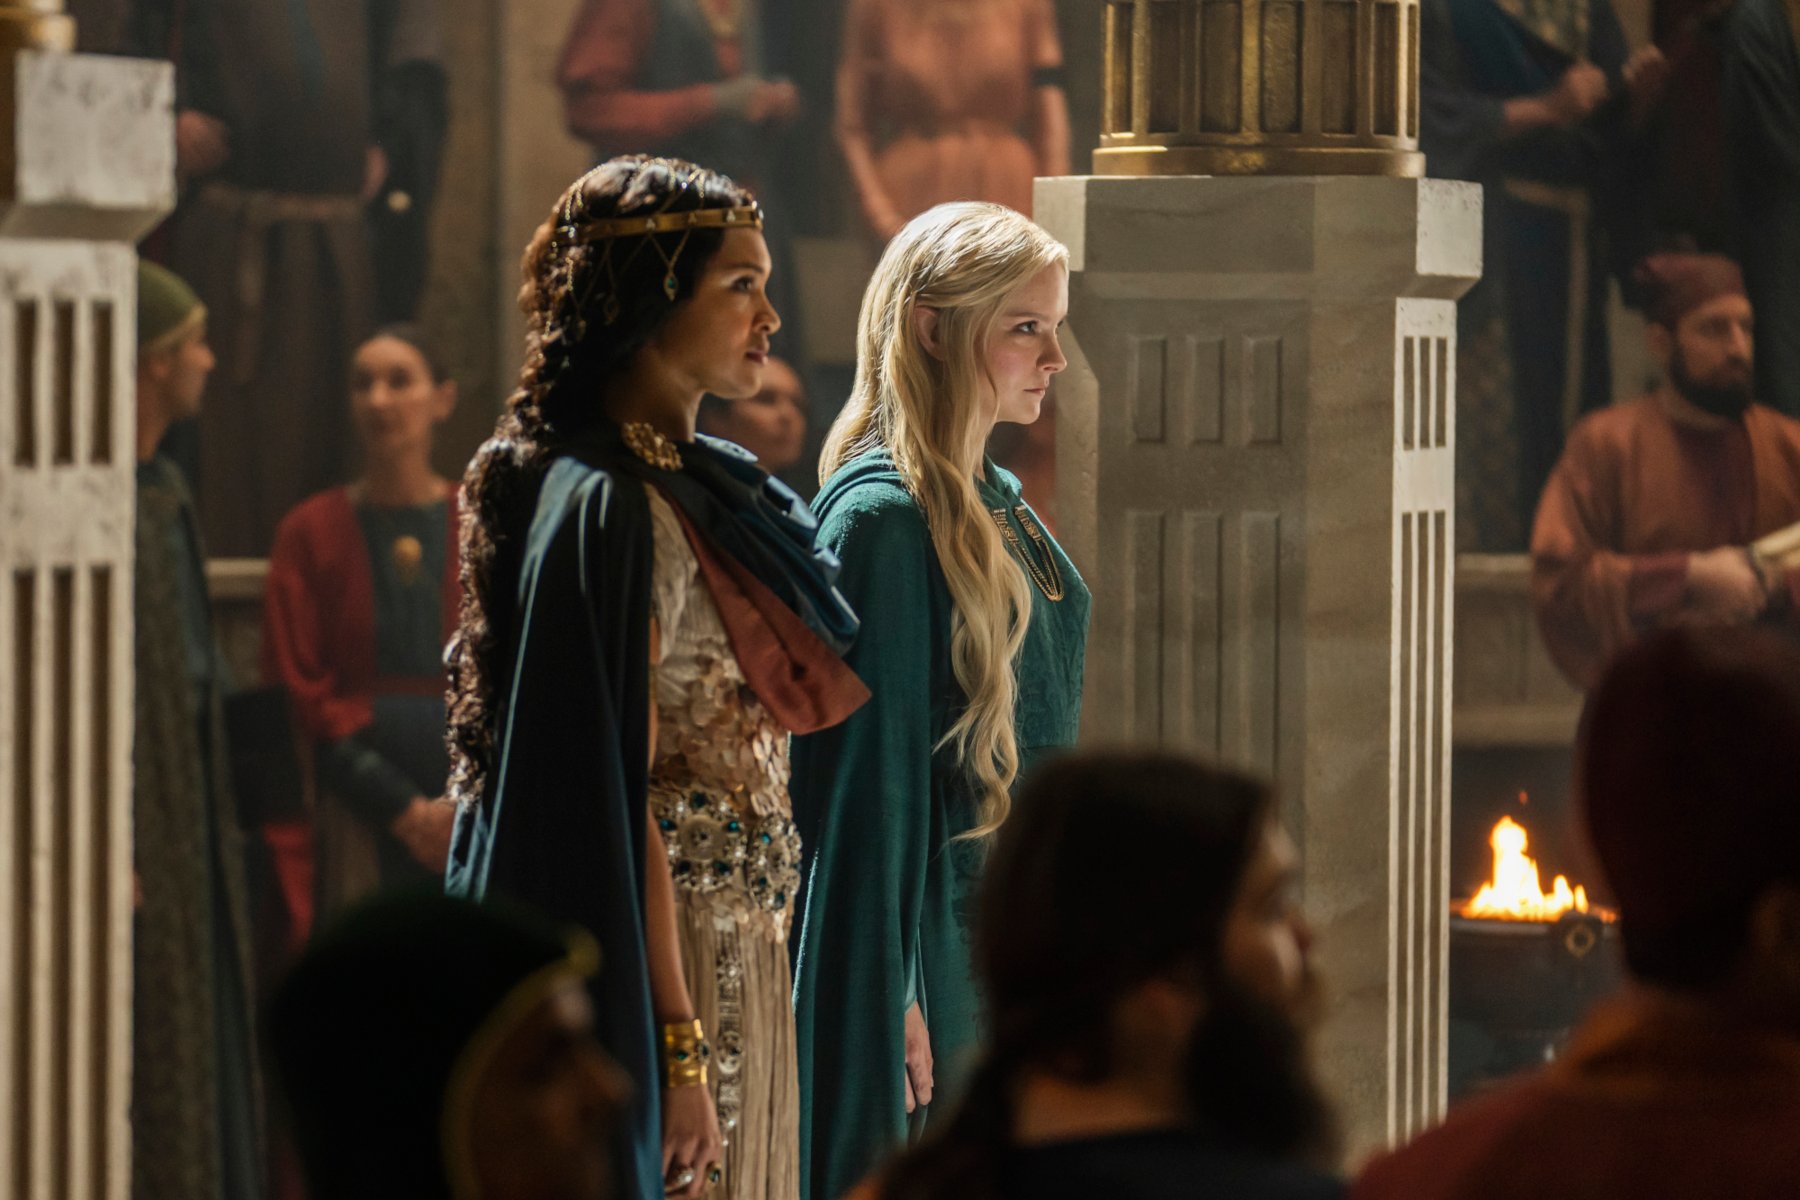 Cynthia Addai-Robinson and Morfydd Clark in 'The Rings of Power' for our article about episode 5's release date and time. The two are standing side by side before a crowd.